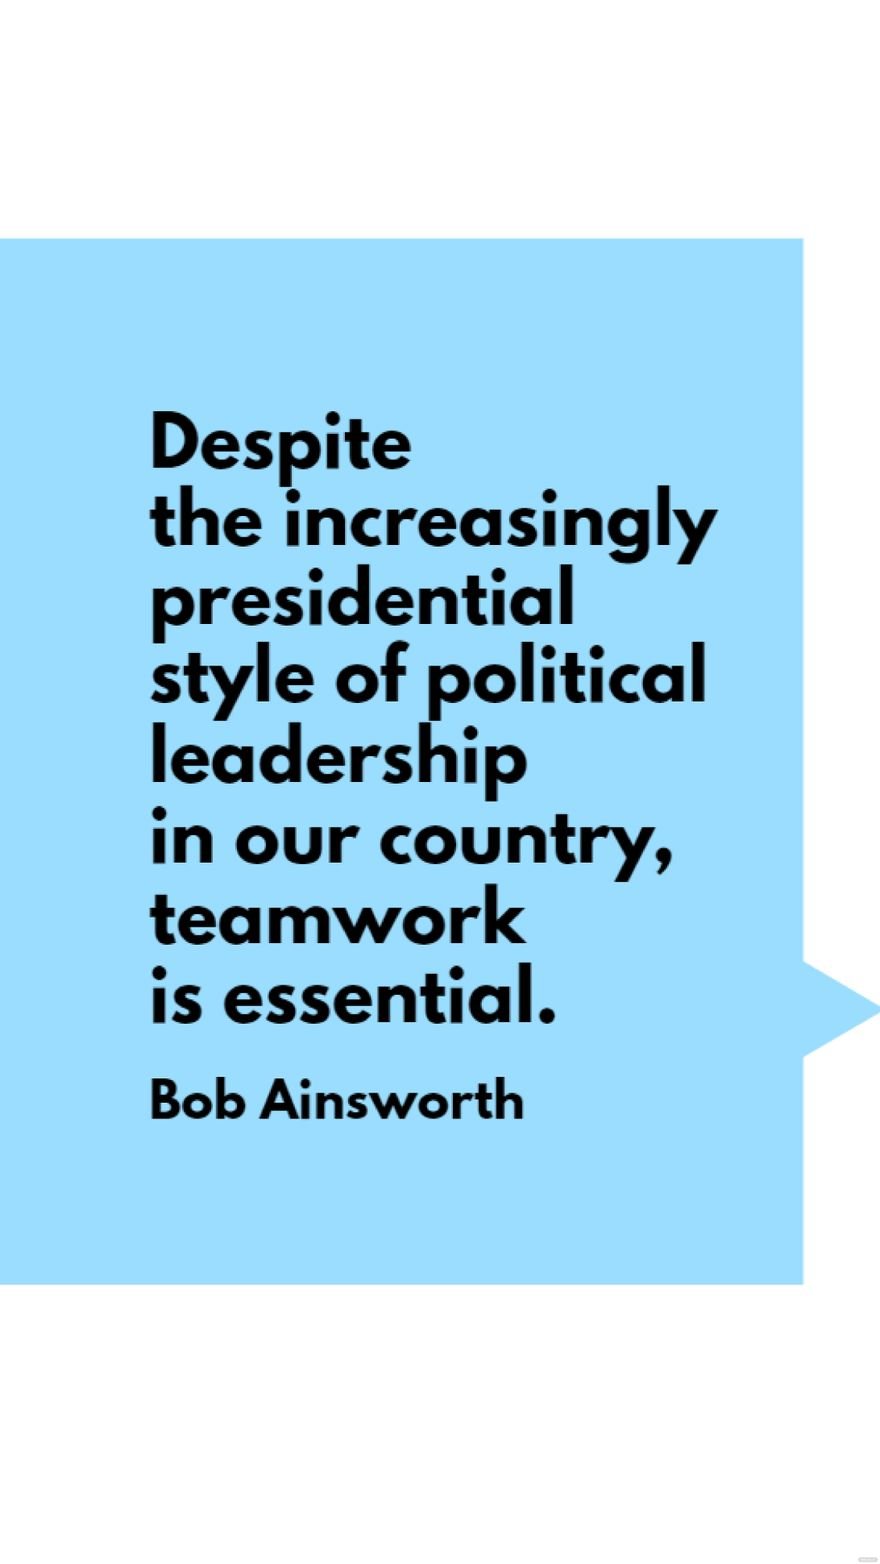 Bob Ainsworth - Despite the increasingly presidential style of political leadership in our country, teamwork is essential.